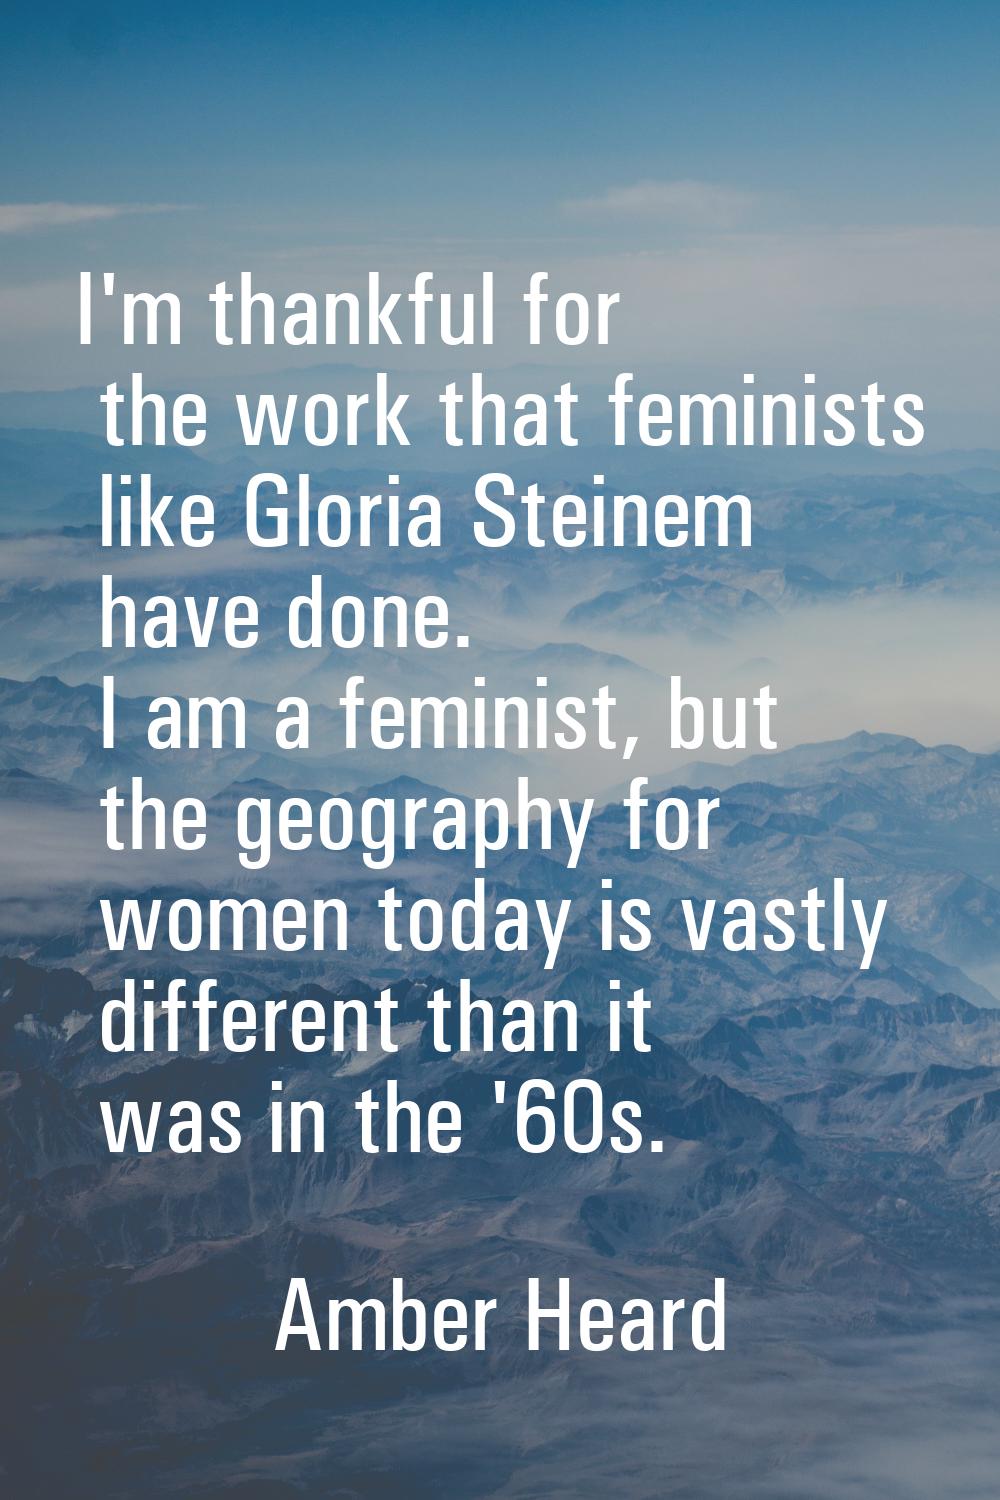 I'm thankful for the work that feminists like Gloria Steinem have done. I am a feminist, but the ge